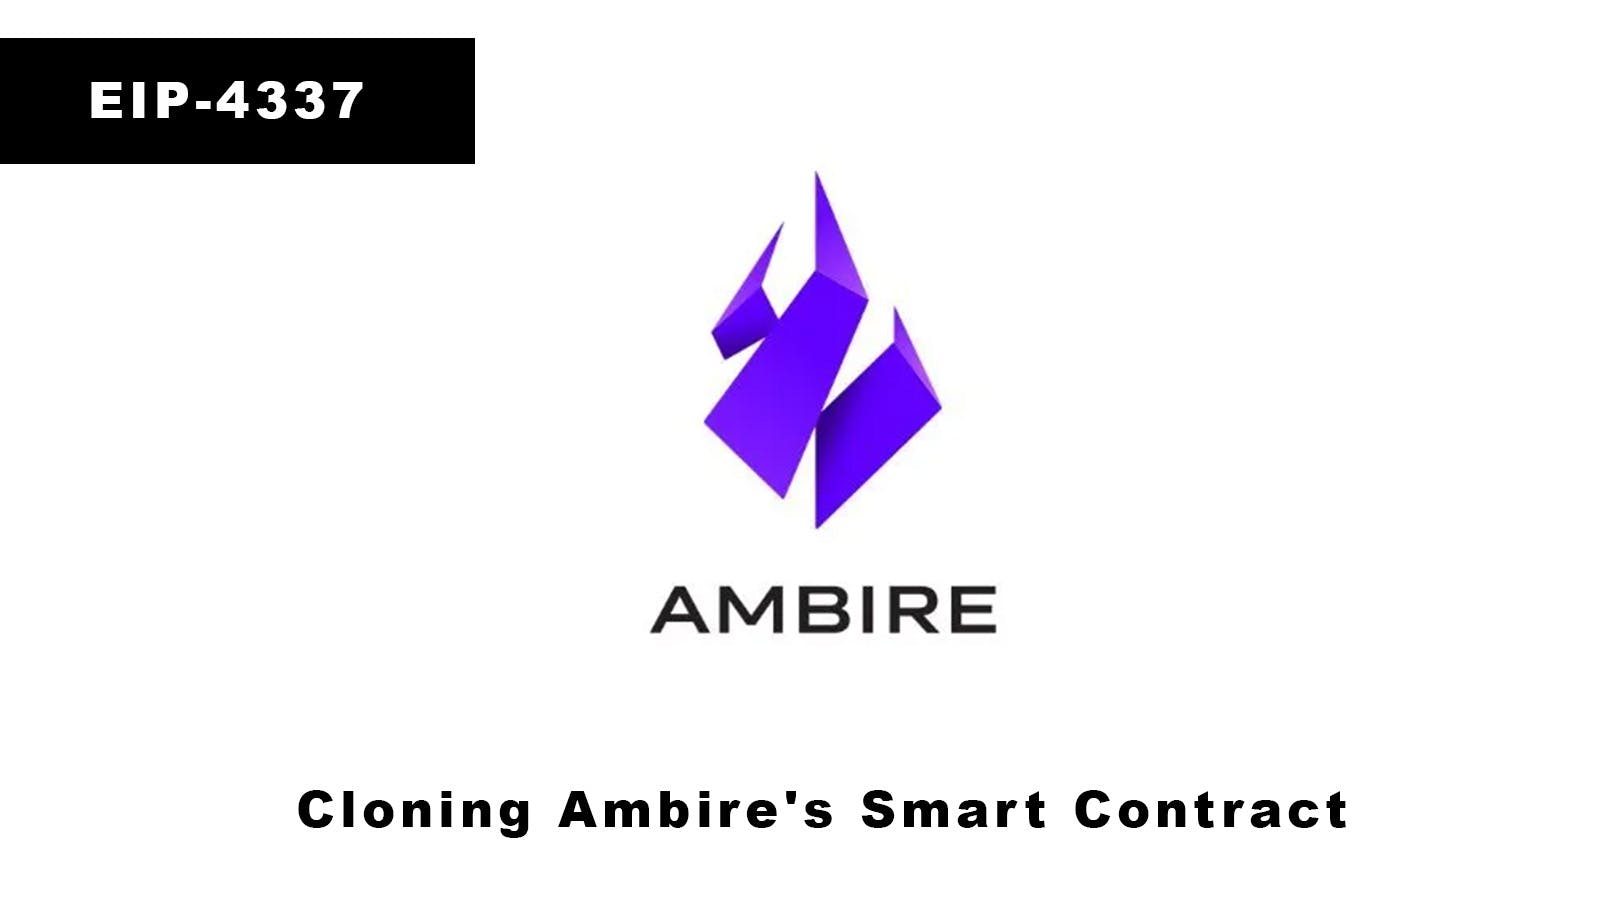 Creating a Custom Wallet with EIP-4337: Cloning Ambire's Smart Contract